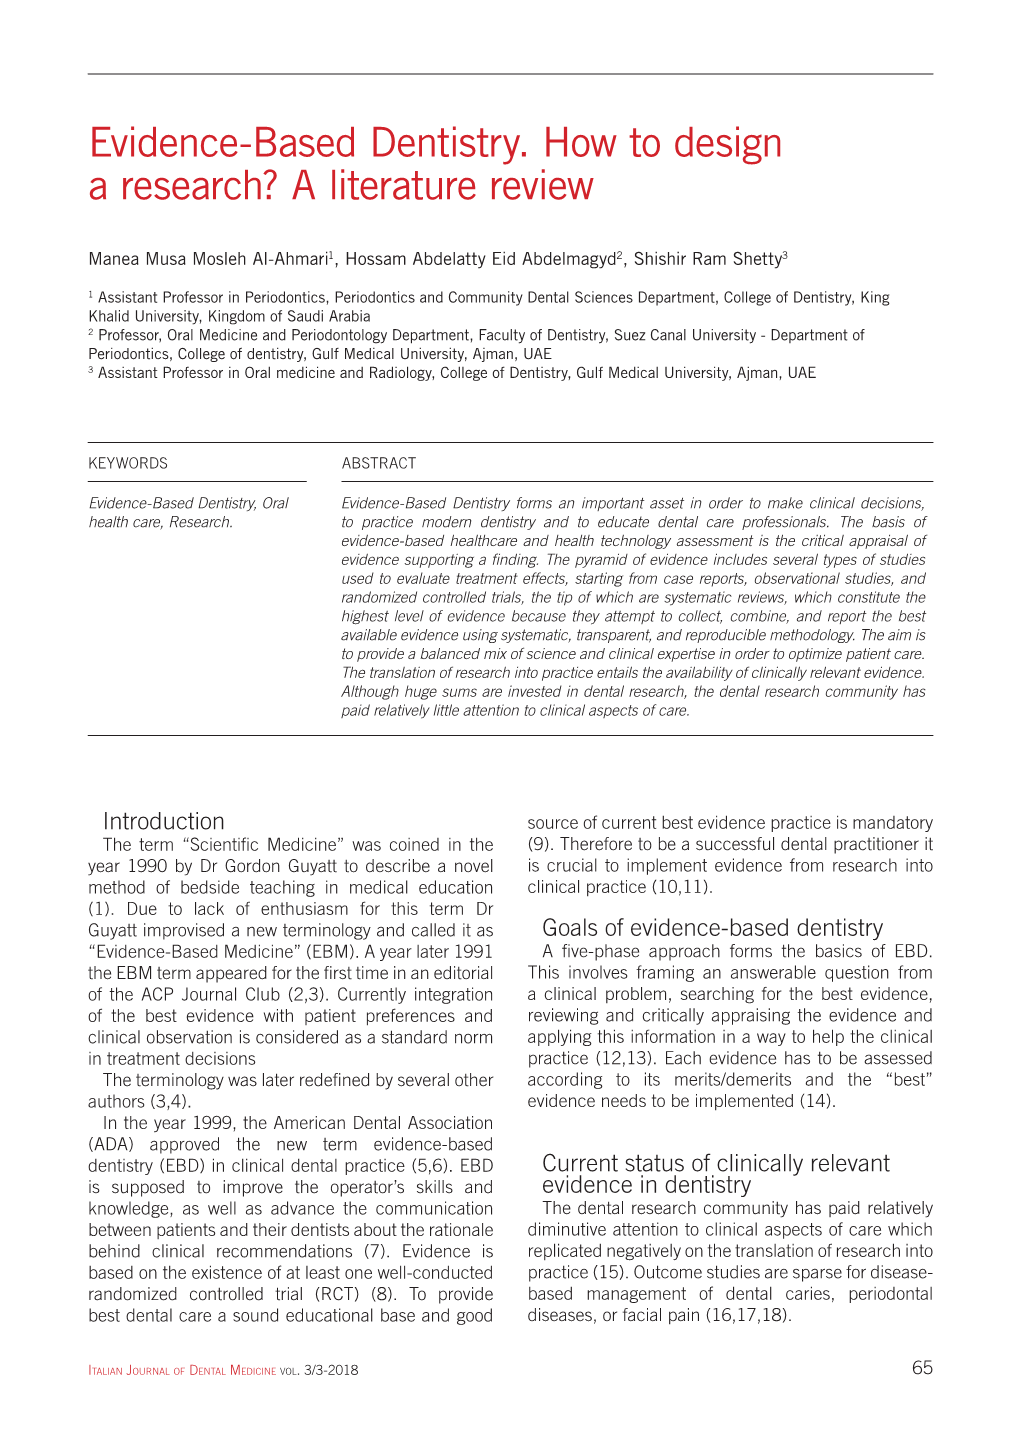 Evidence-Based Dentistry. How to Design a Research? a Literature Review